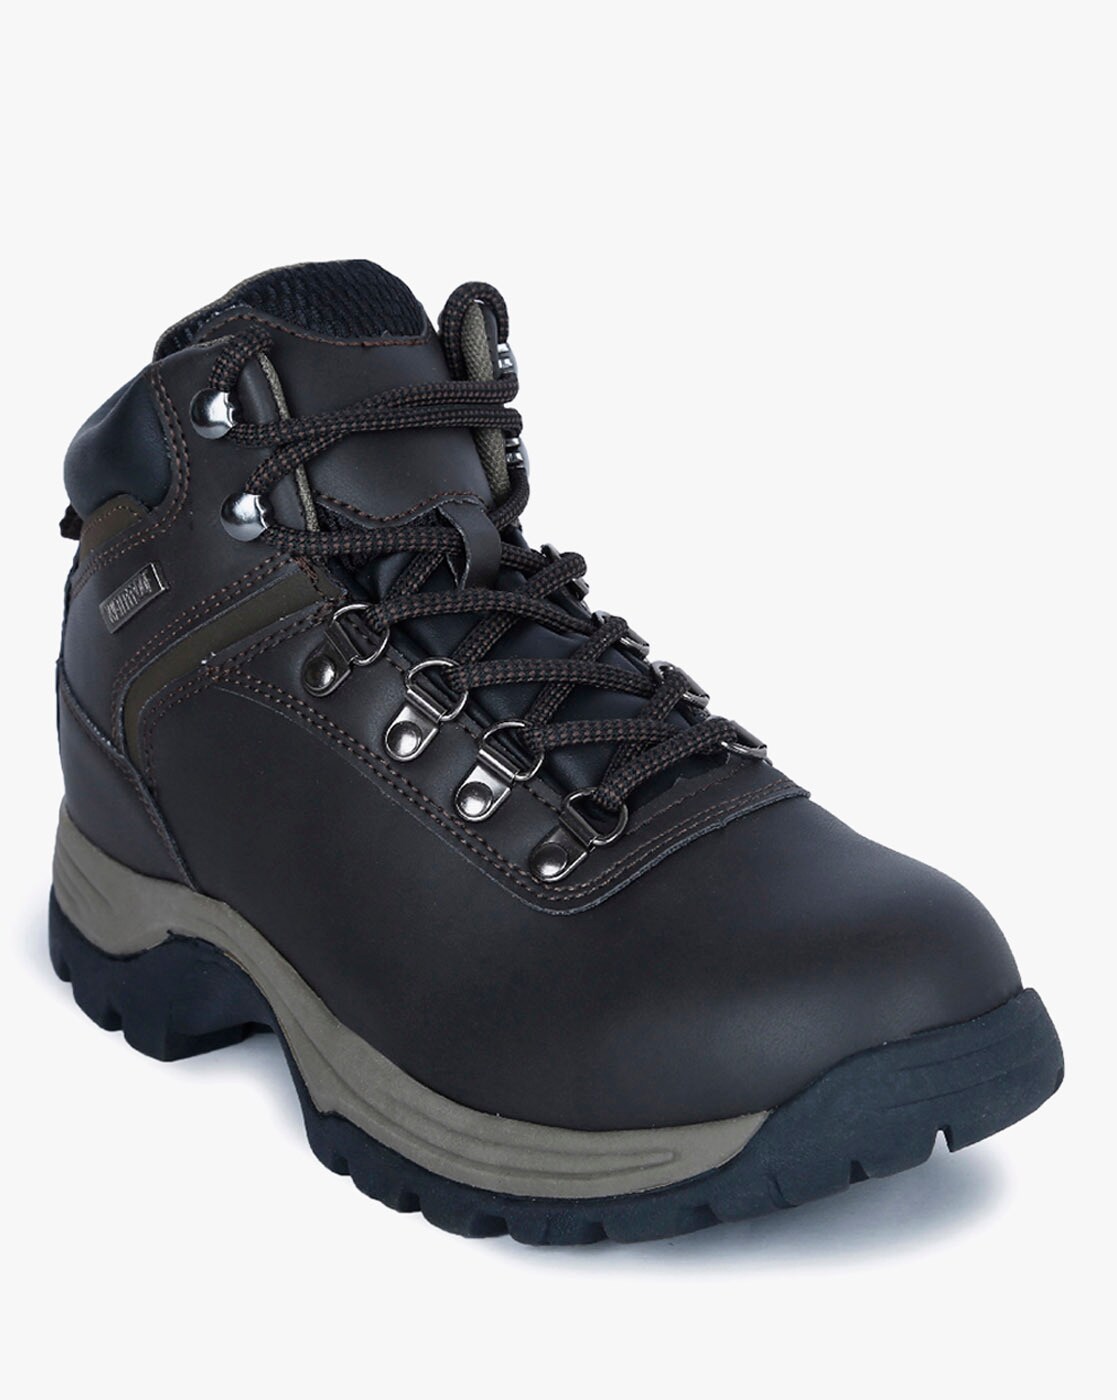 rugged outback steel toe boots